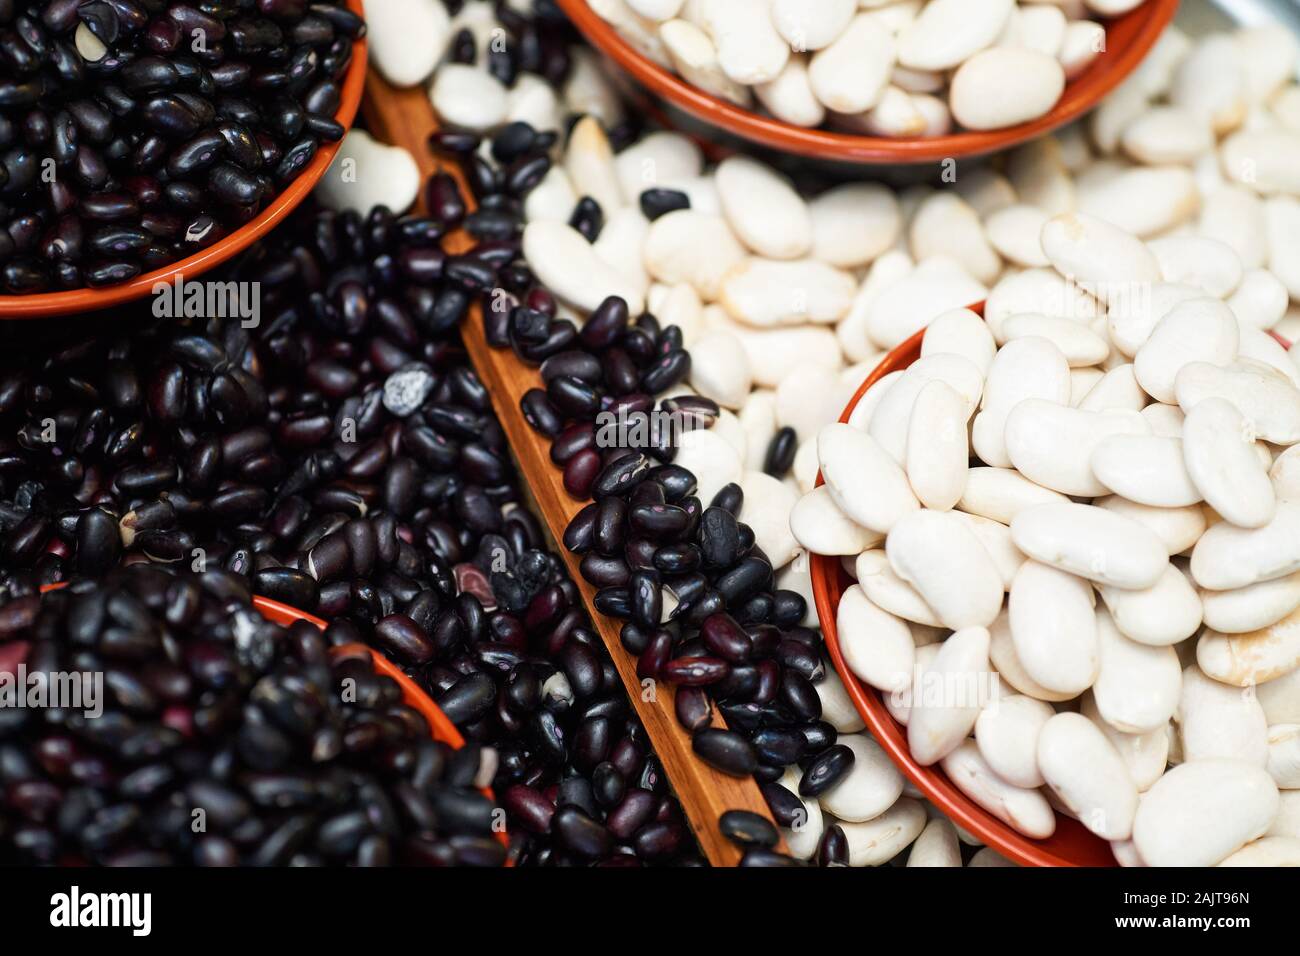 Black and white dried beans for sale at Gwangjang Market in Seoul, South Korea. Stock Photo